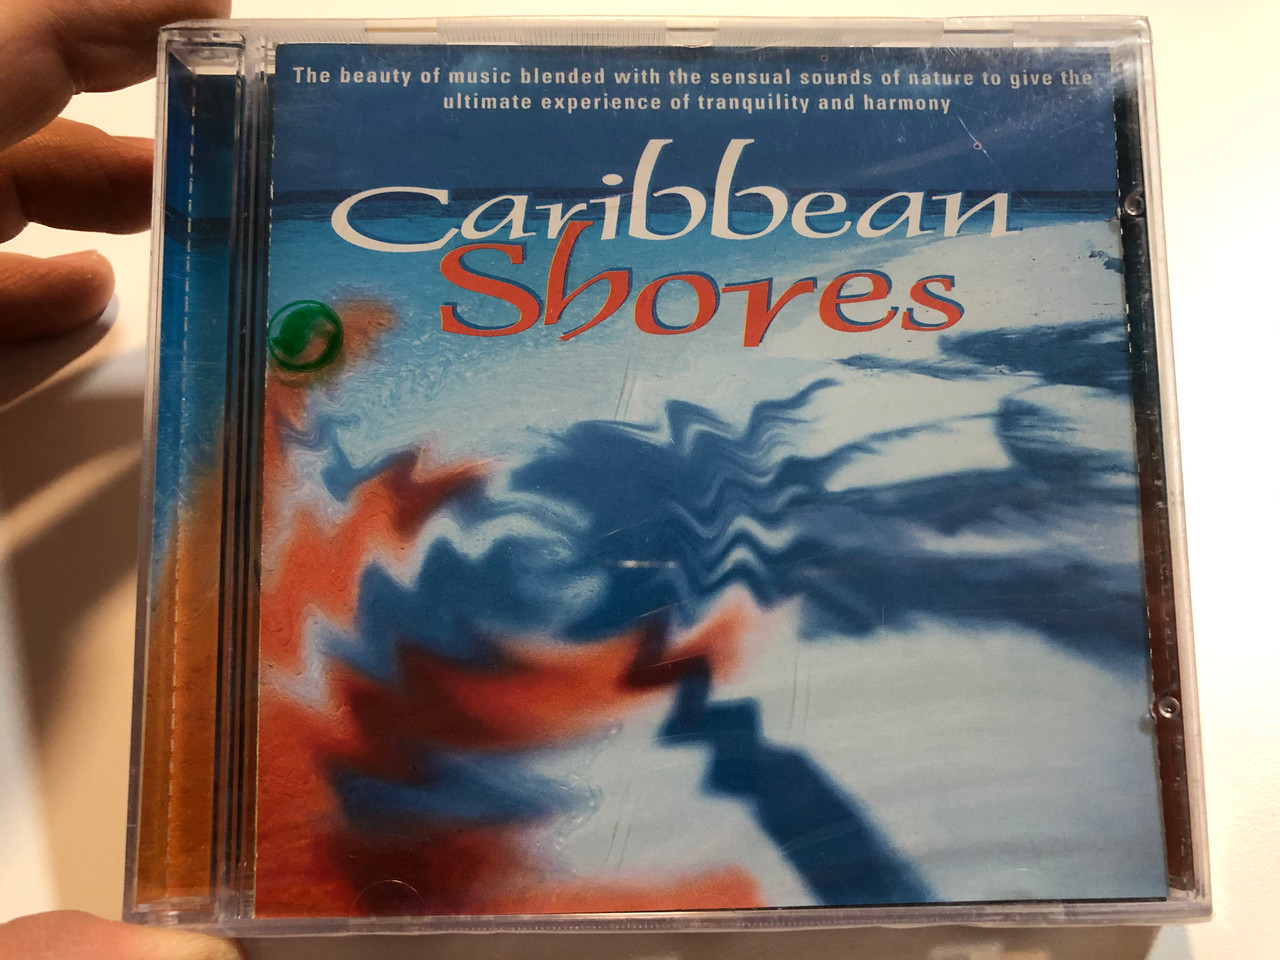 Carribean Shores / The beauty of music blended with the sensual sounds of  nature to give the ultimate experience of tranquility and harmony / Disky  Audio CD 1997 / DC 879512 - bibleinmylanguage